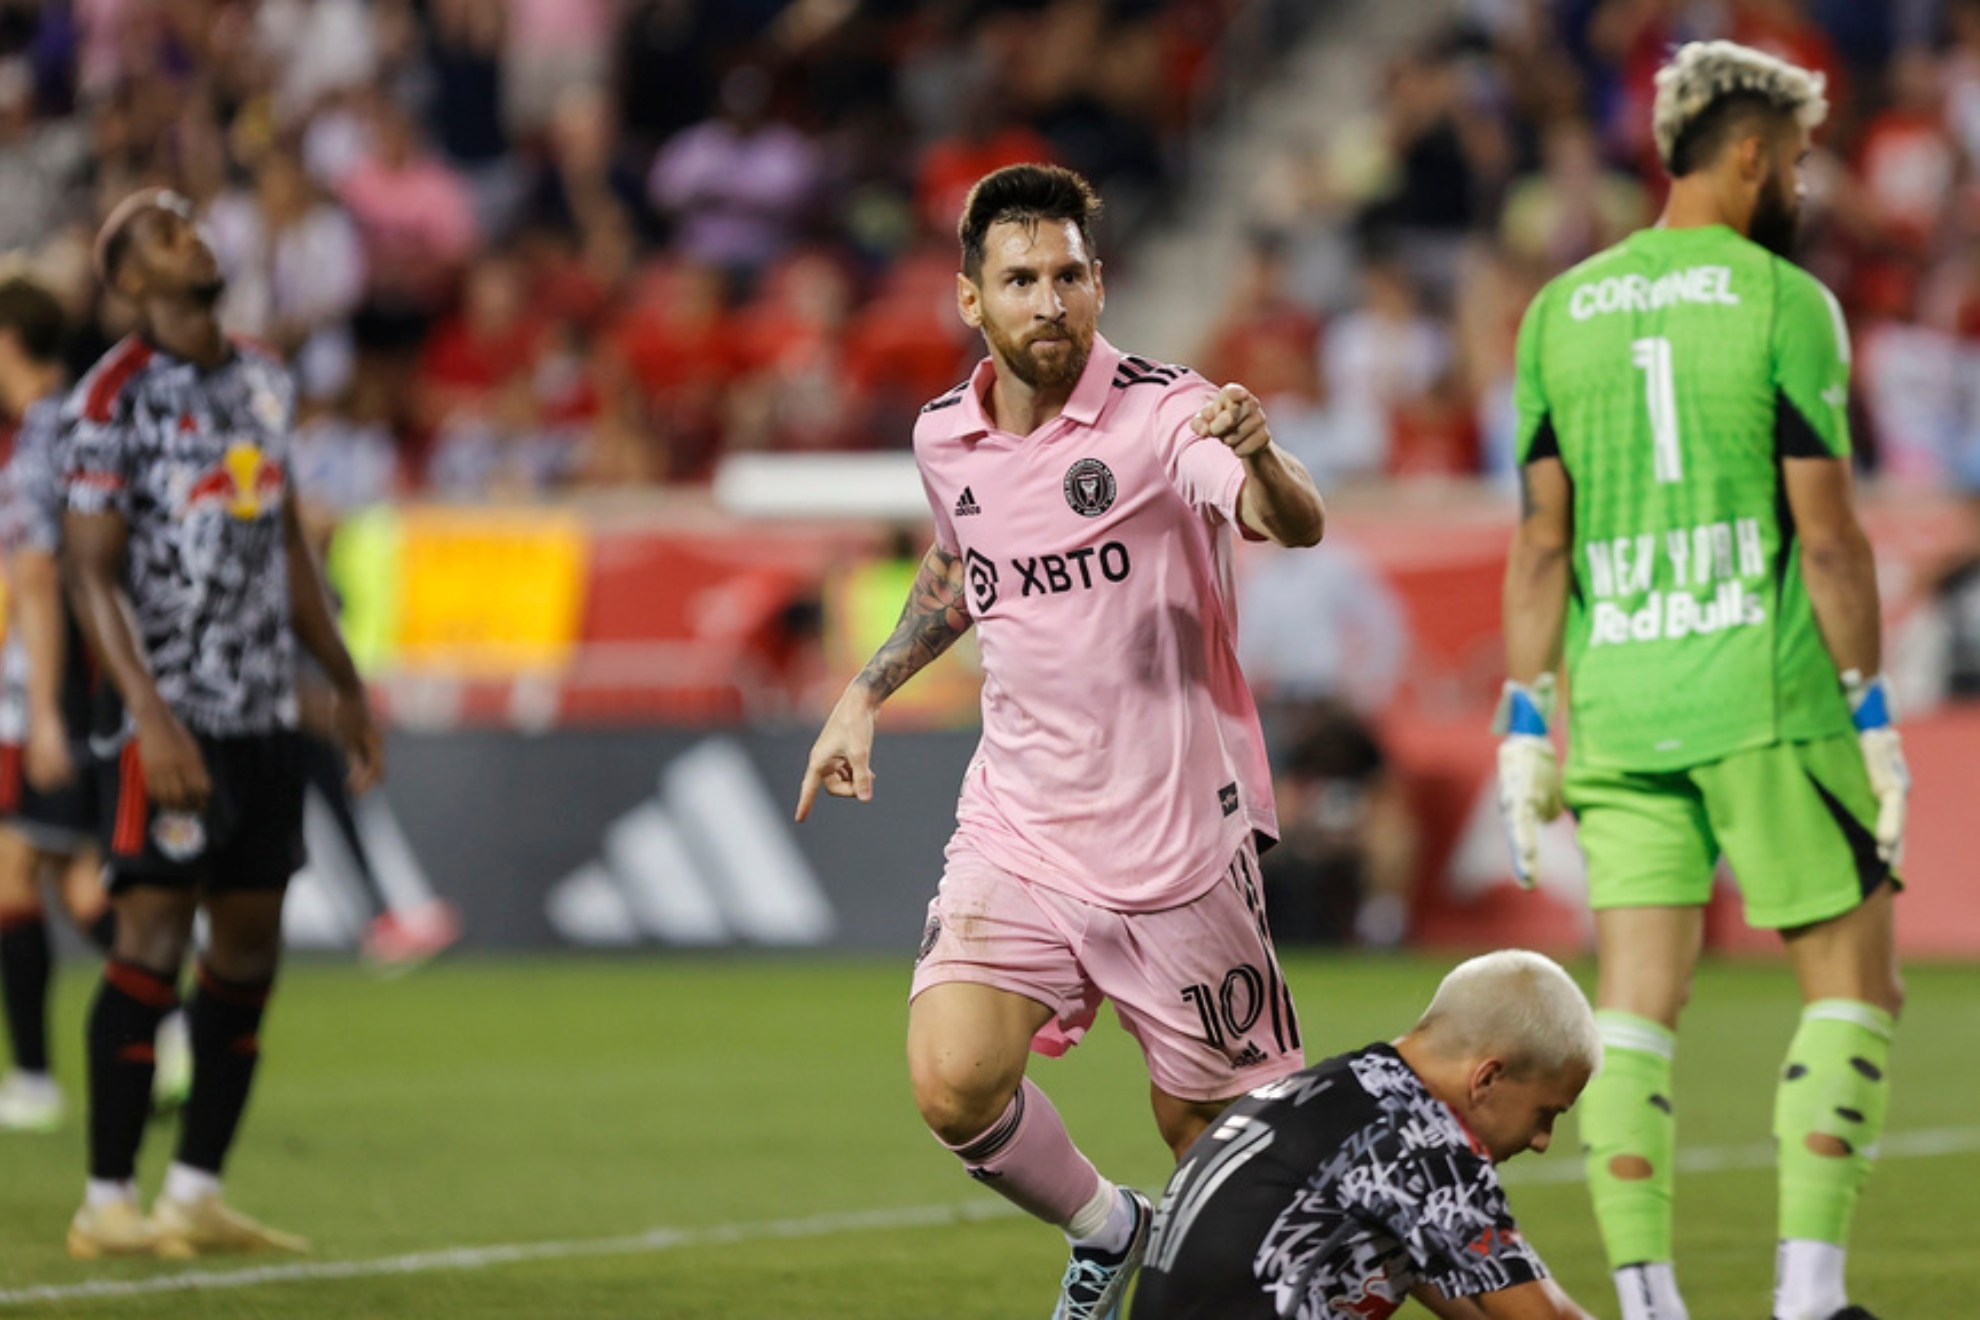 Messi opened his MLS account with a goal and victory vs NY Reb Bulls